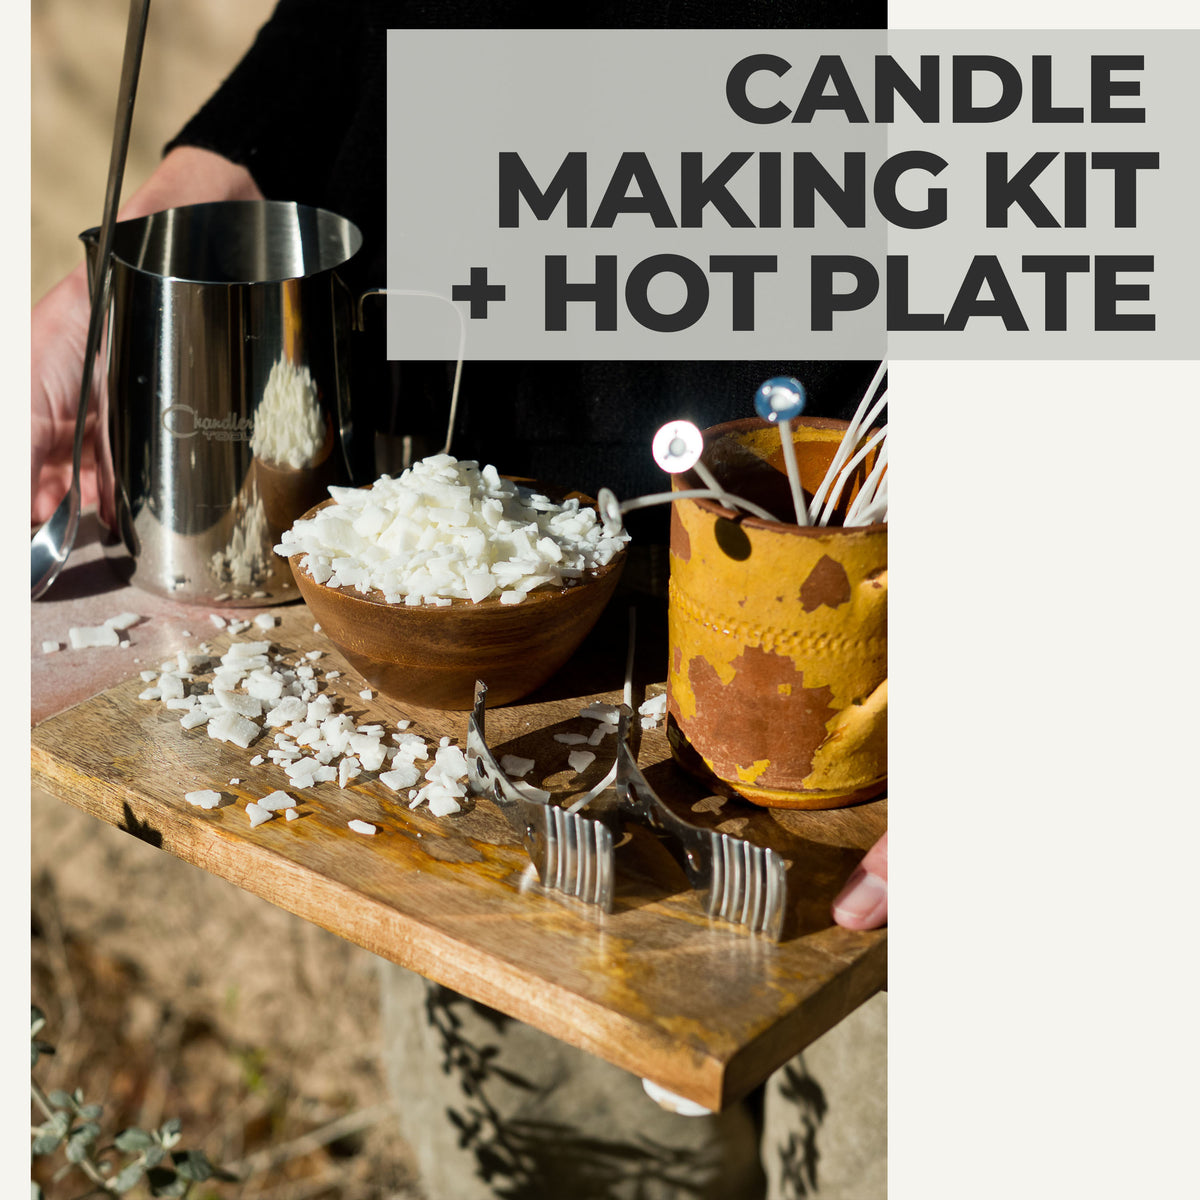 Candle Making Kit With Hot Plate Candle Making Kit For Beginners